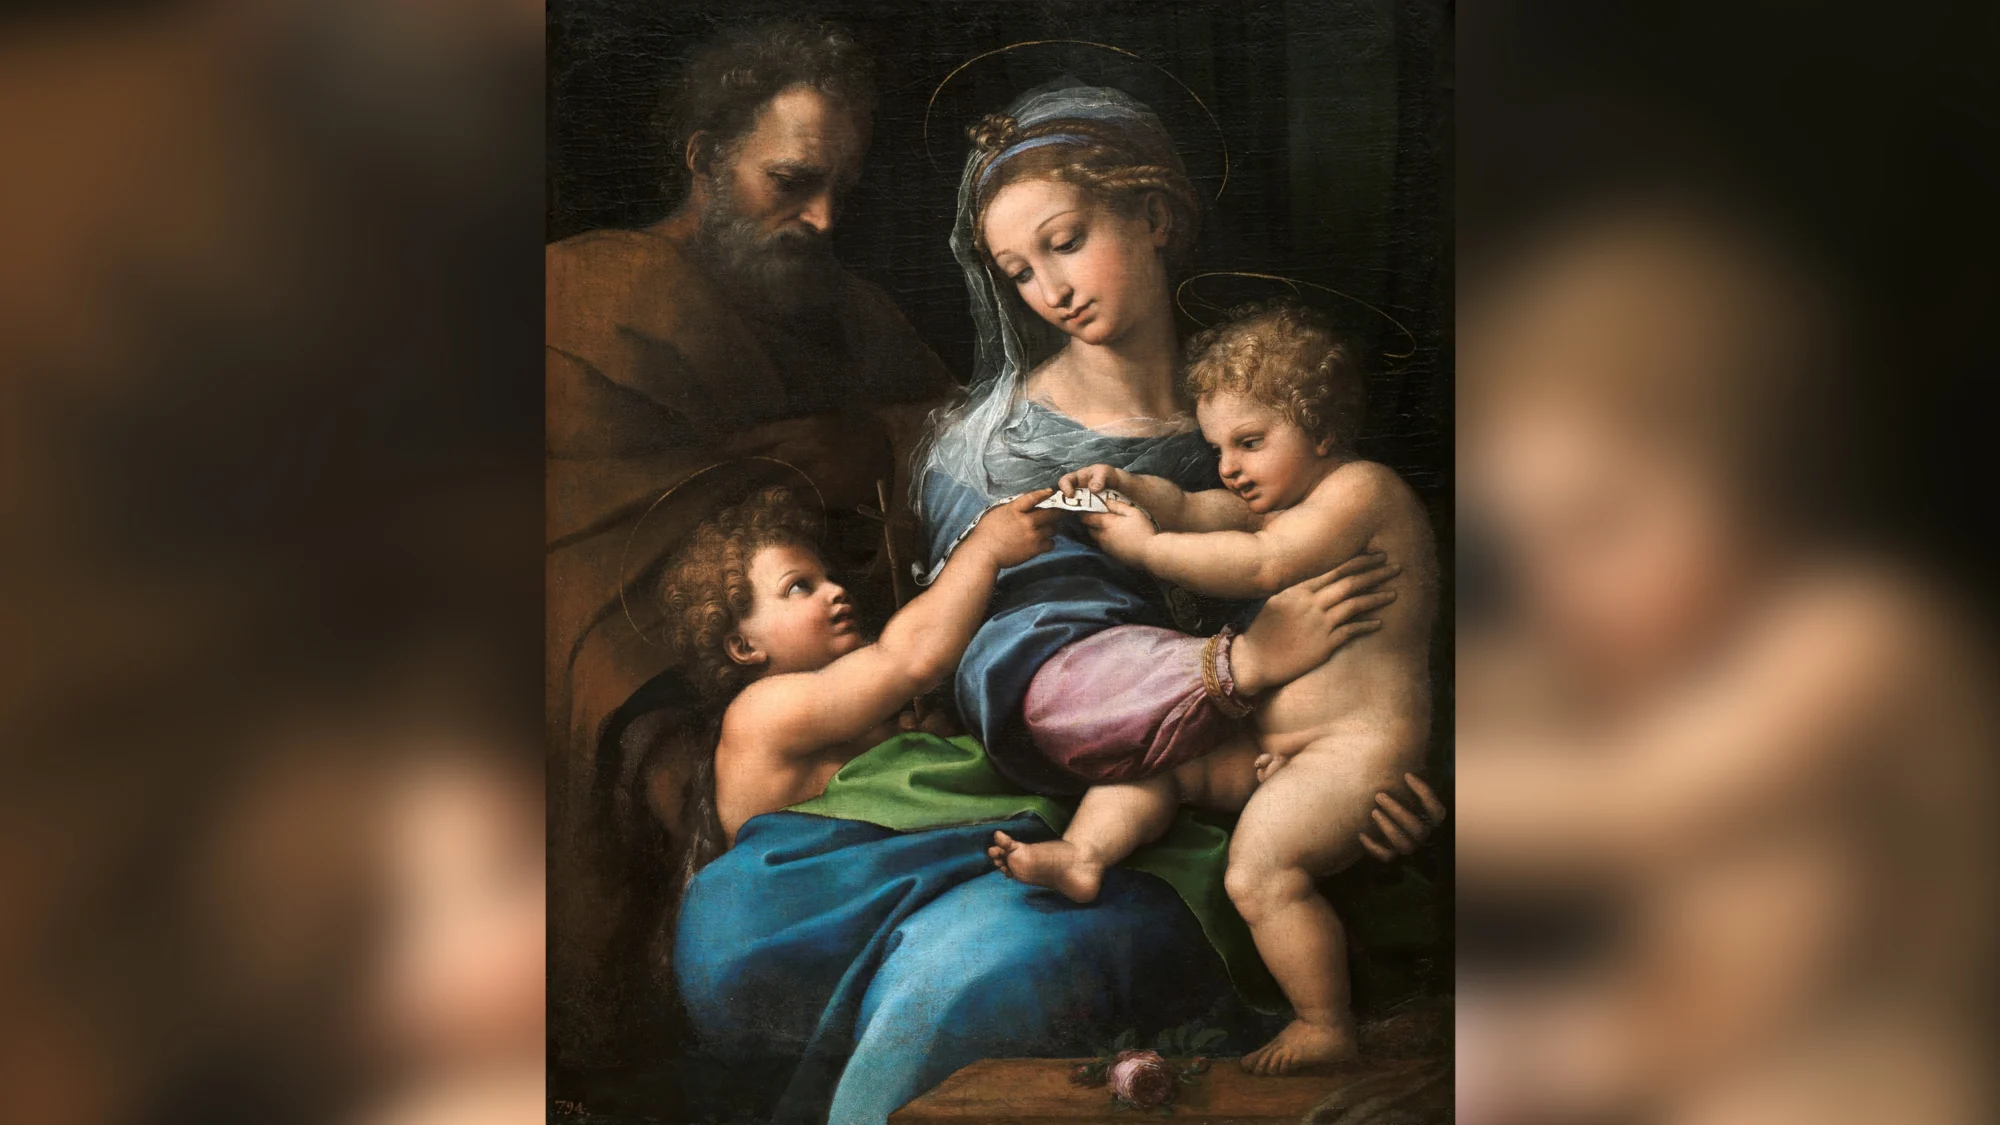 This Raphael masterpiece isn't quite what it seems